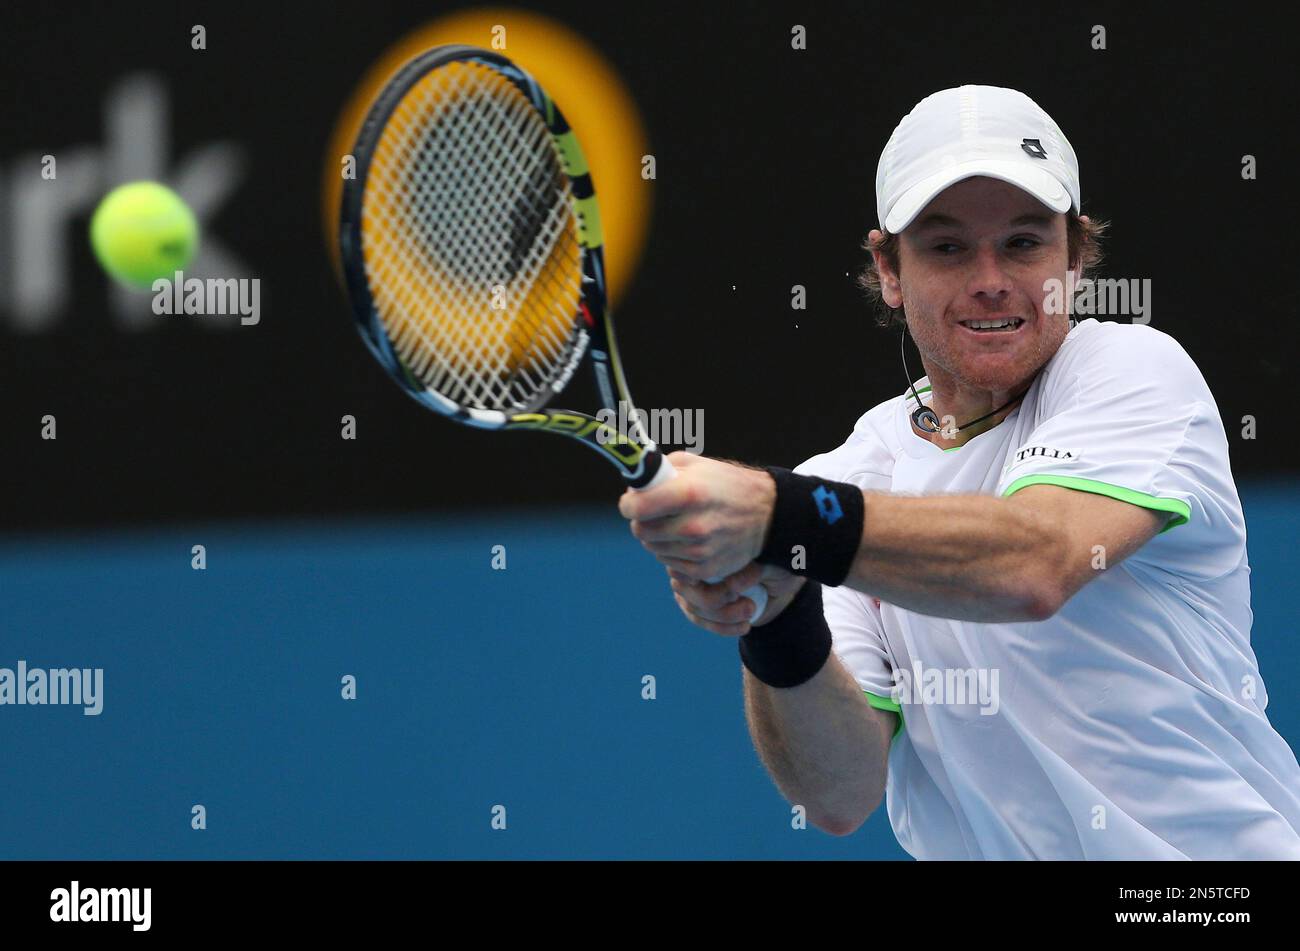 Blaz Kavcic of Slovakia plays a backhand shot in his match against Bernard  Tomic of Australia during the Sydney International Tennis Tournament in  Sydney, Australia, Wednesday, Jan. 8, 2014. (AP Photo/Rob Griffith